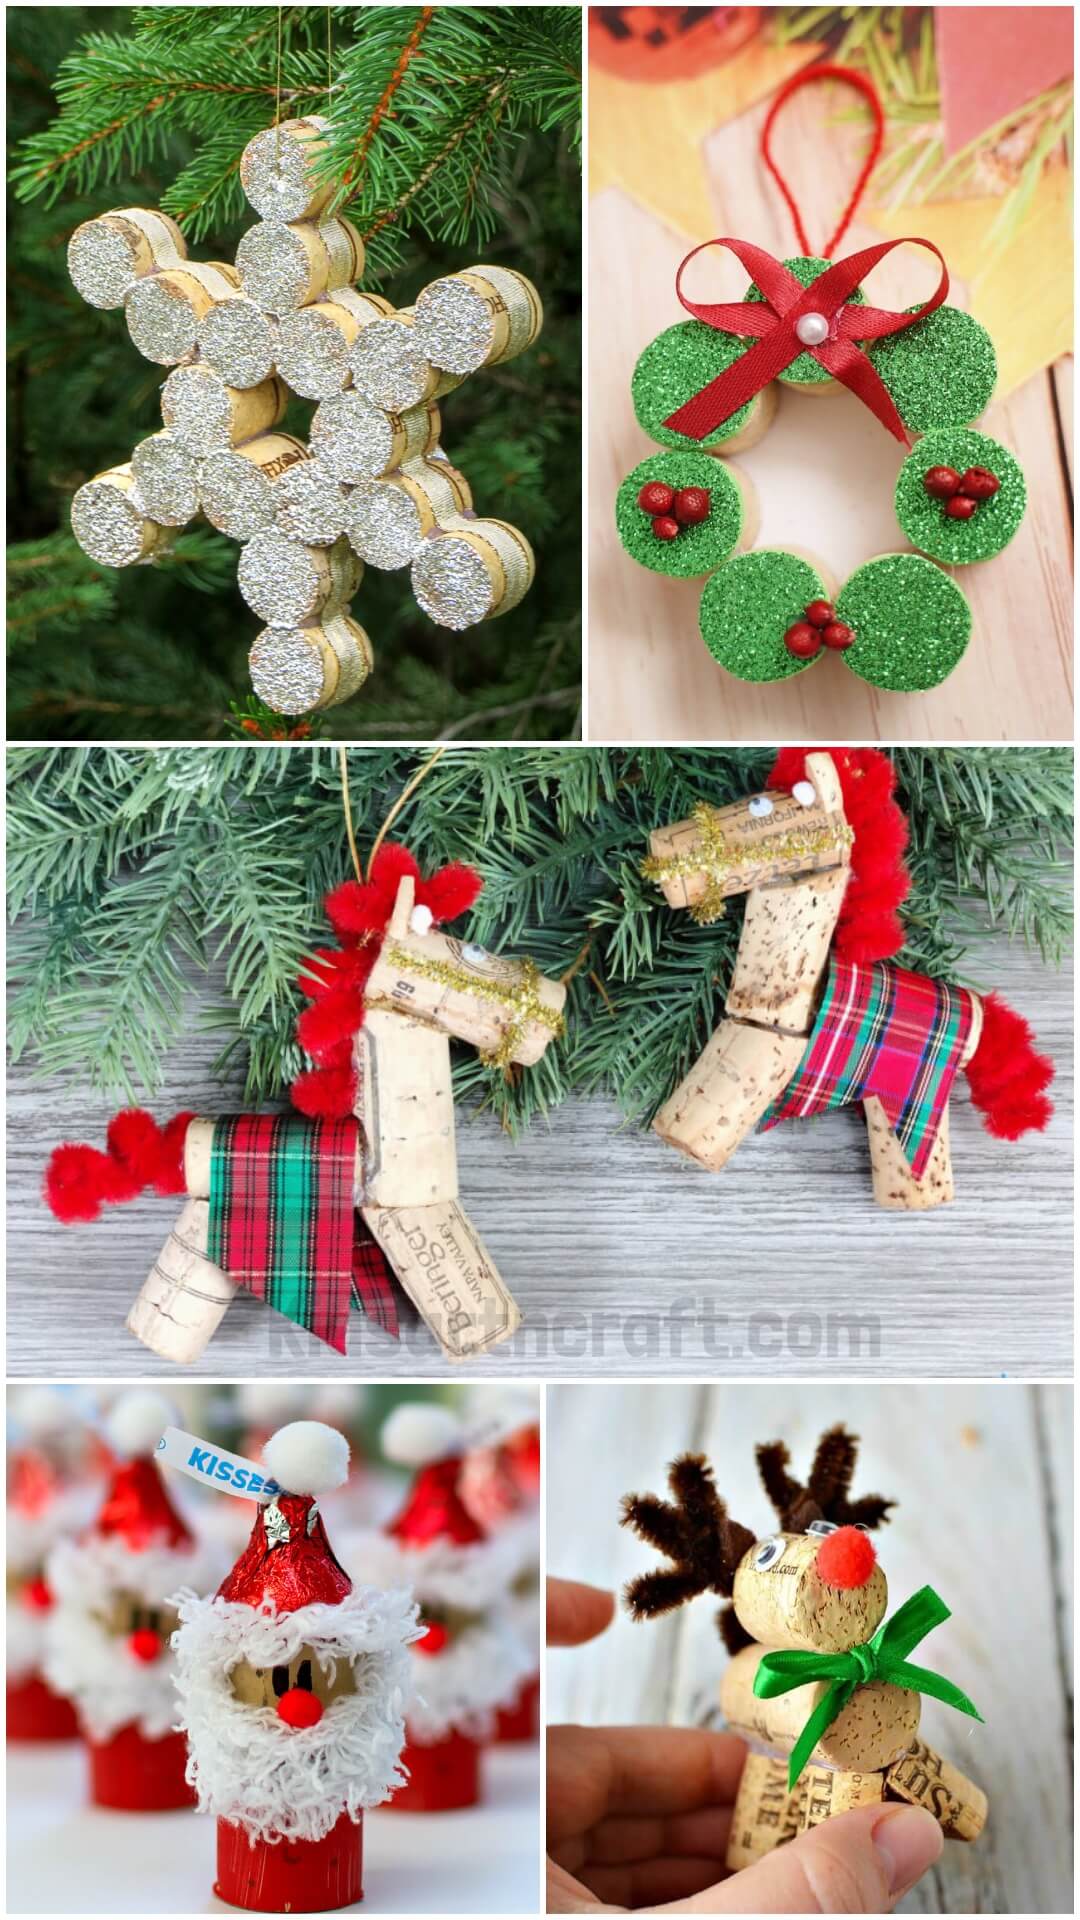 Cork crafts for Christmas